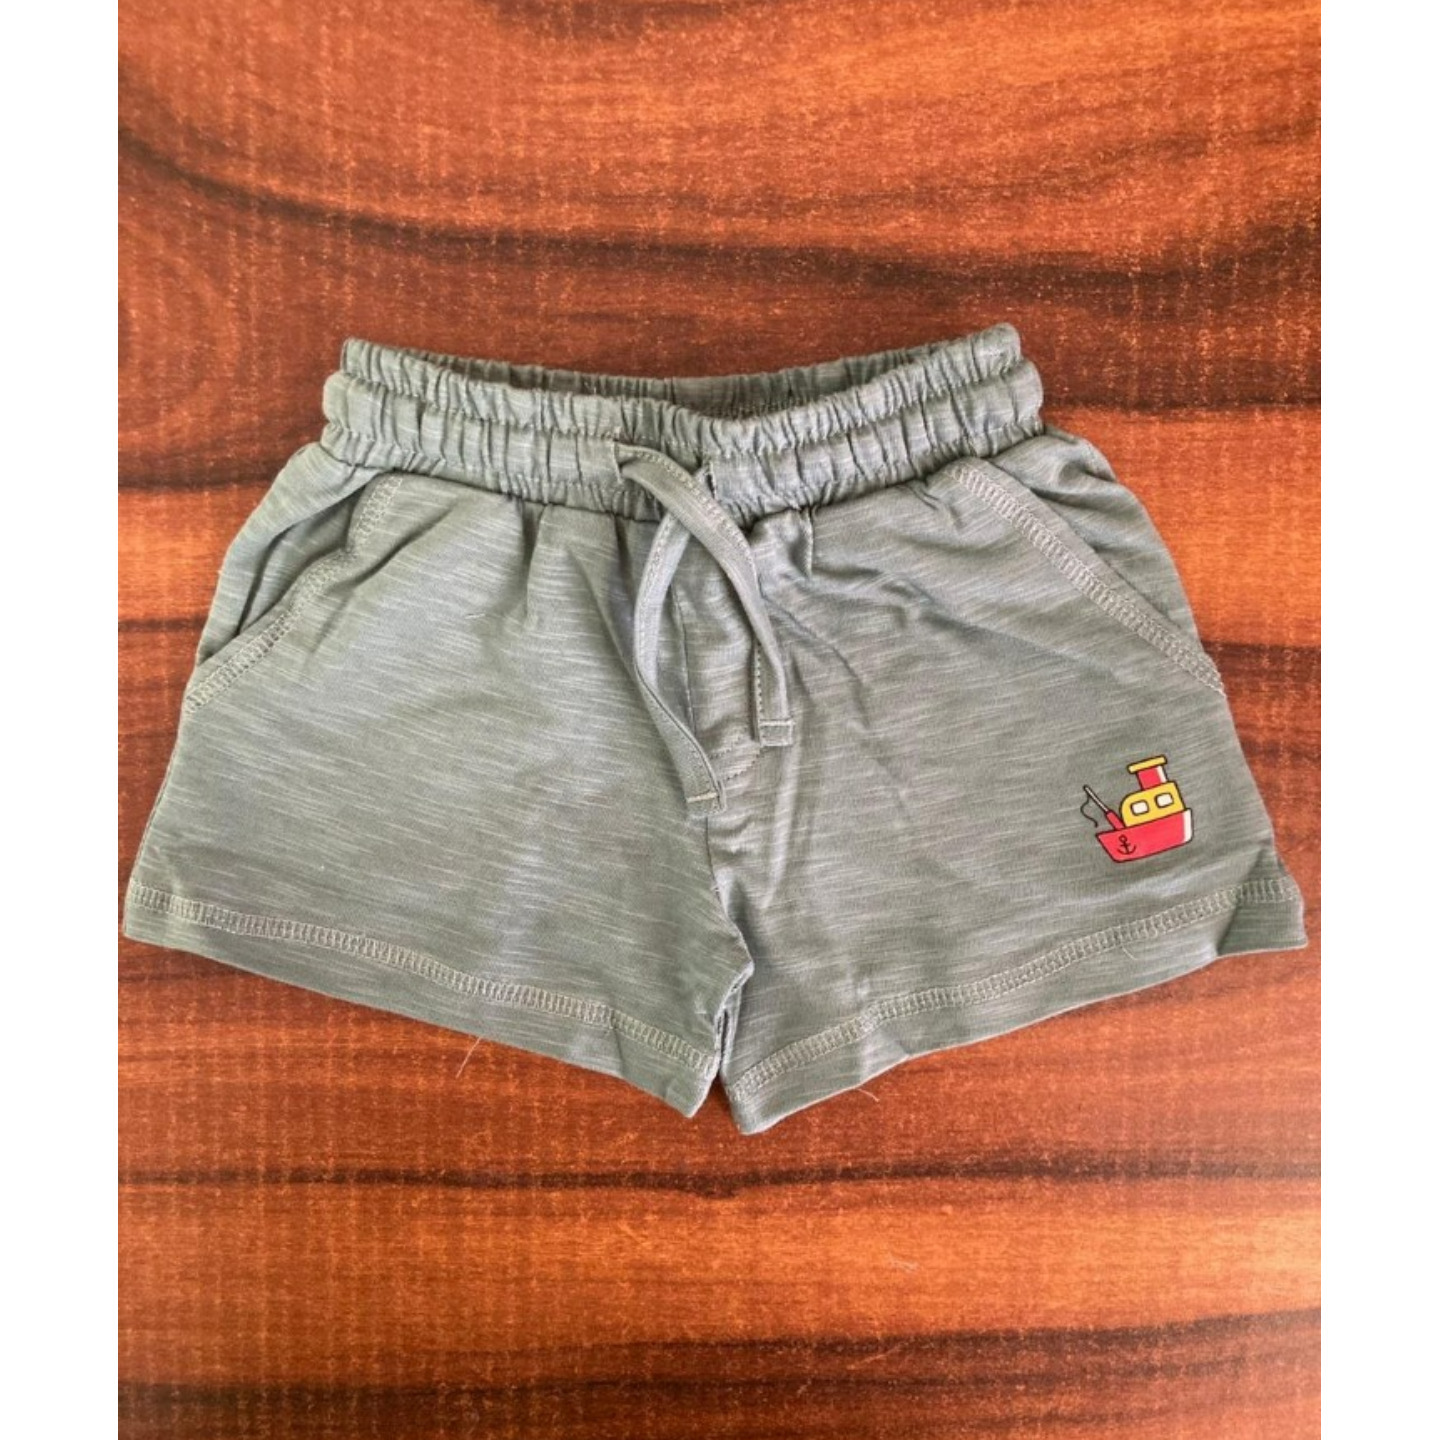 Cucumber NikarShorts Rs 150 Only Made In India Medium Size 6 to 12 Months